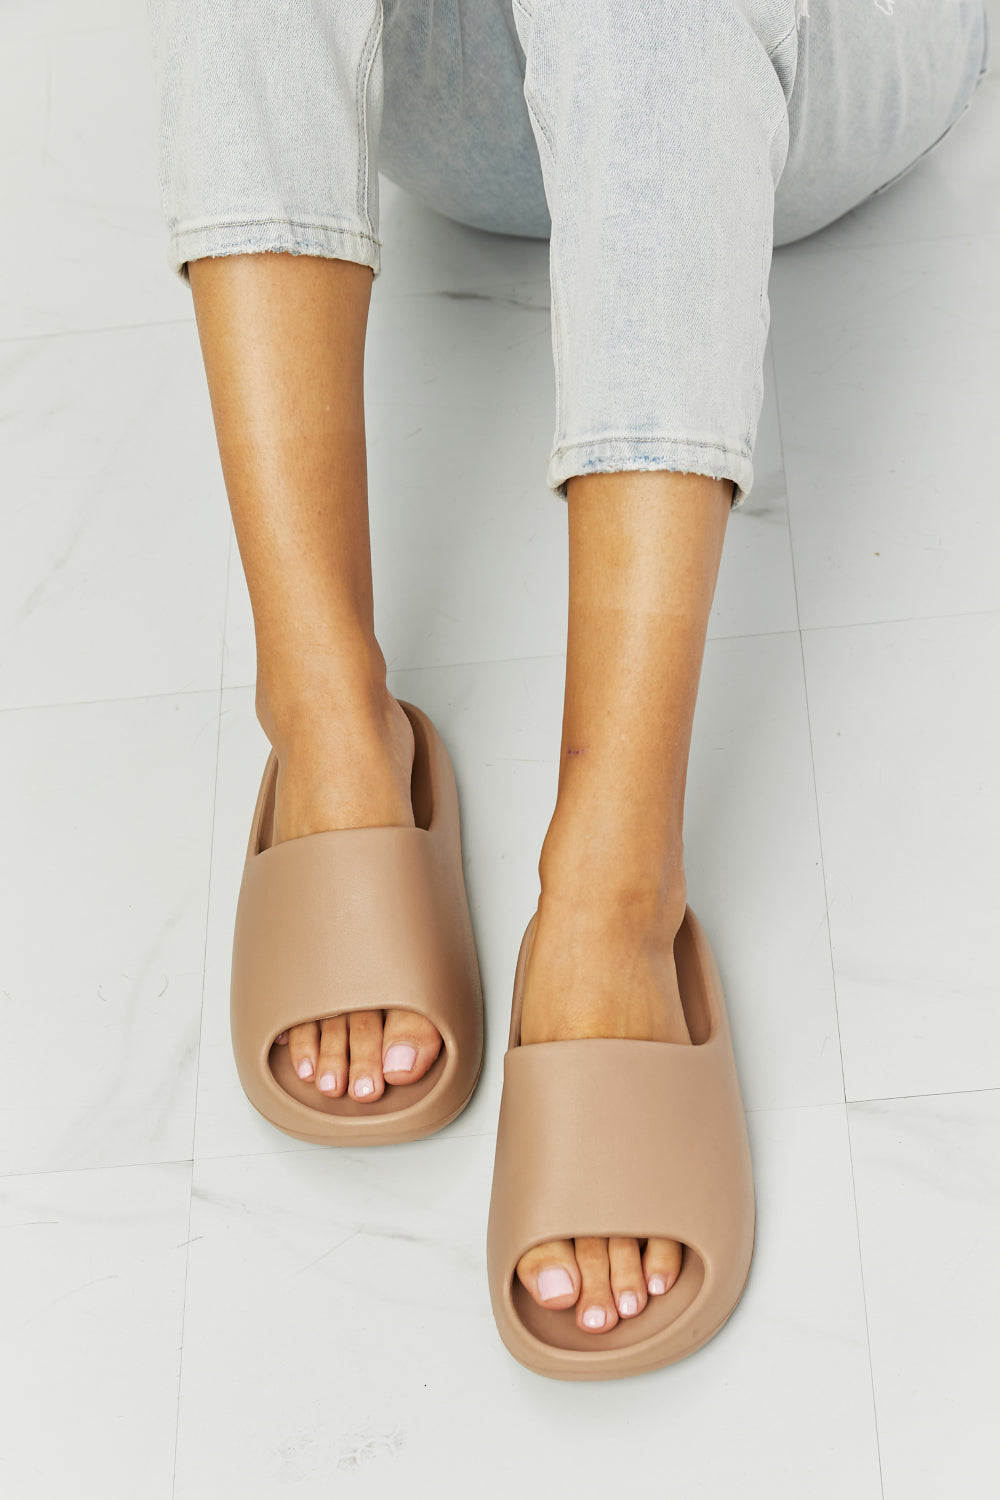 NOOK JOI In My Comfort Zone Slides in Beige - Cheeky Chic Boutique